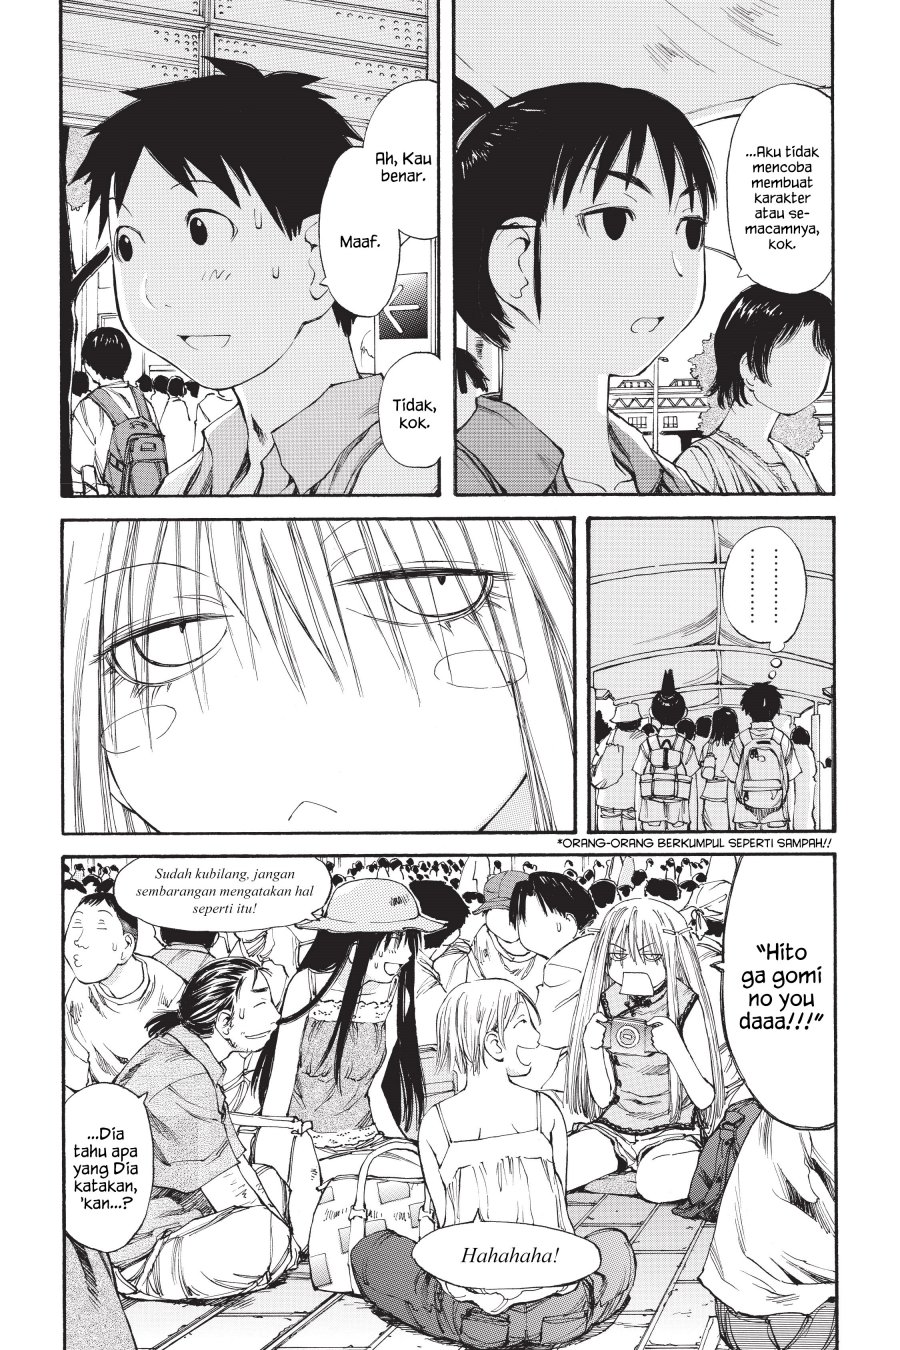 Genshiken – The Society for the Study of Modern Visual Culture Chapter 41 Image 4